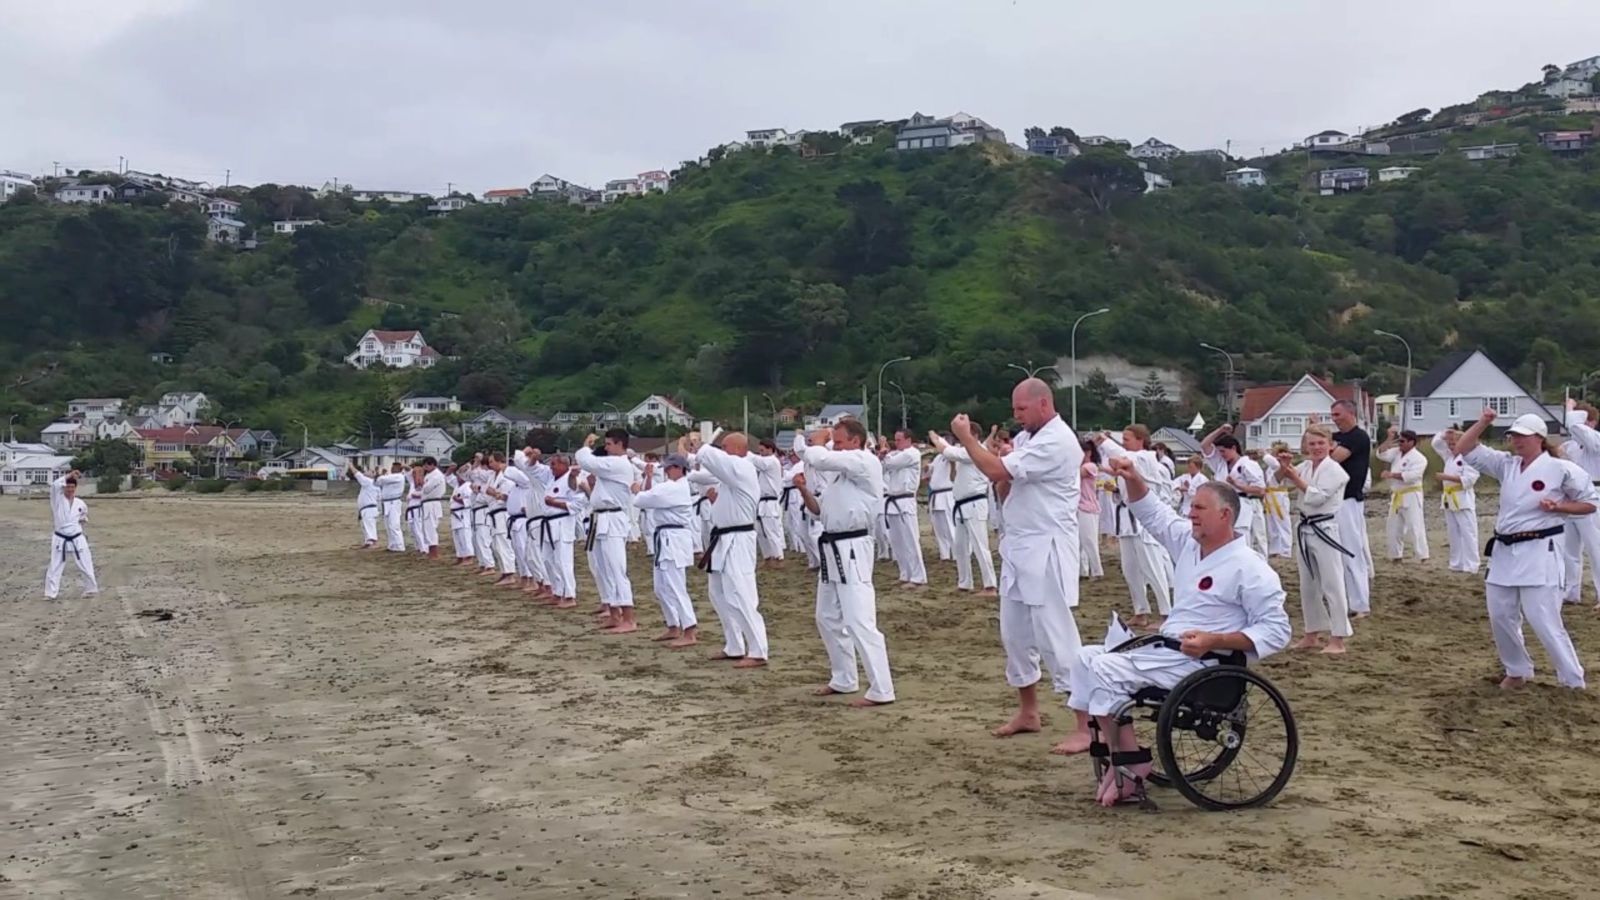 Karate training session on the beach.